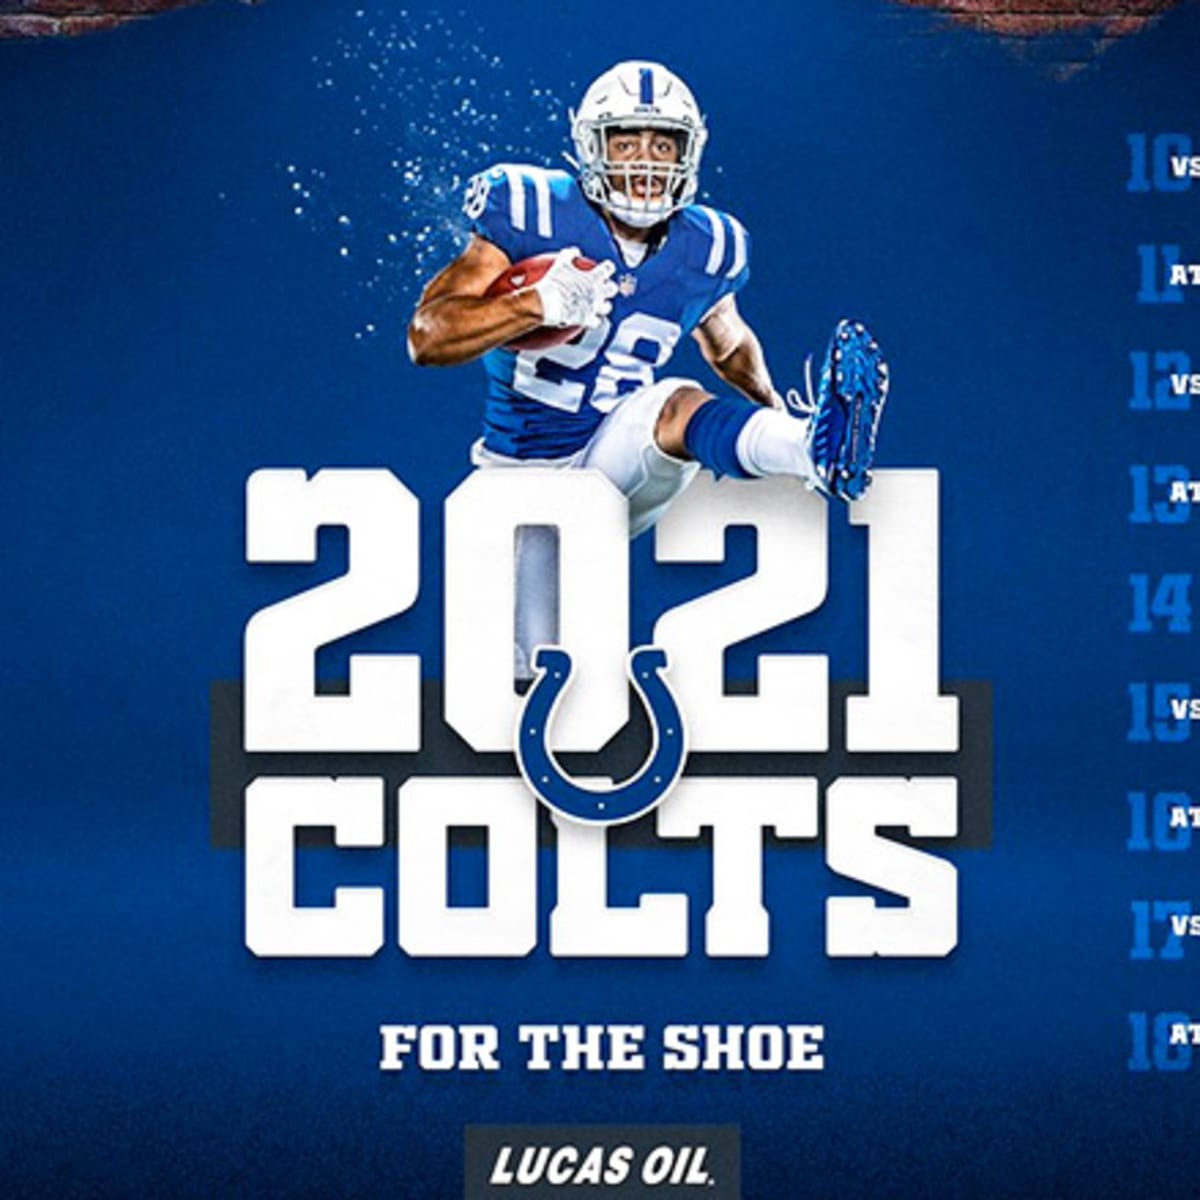 Indy Colts 2022 Schedule Indianapolis Colts Schedule 2021 - Athlonsports.com | Expert Predictions,  Picks, And Previews